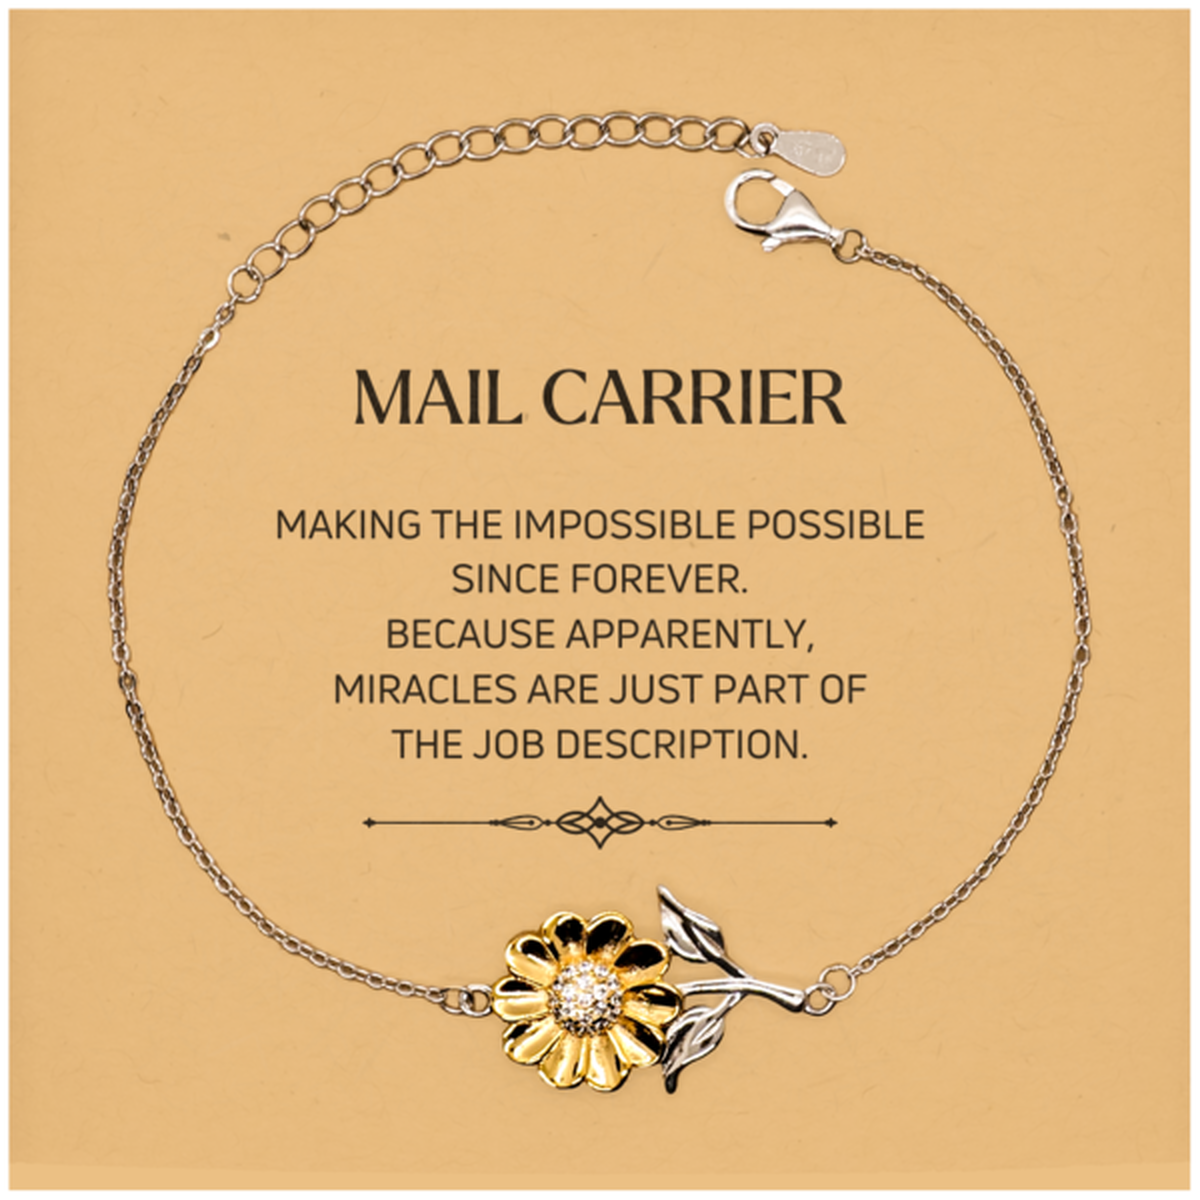 Funny Mail Carrier Gifts, Miracles are just part of the job description, Inspirational Birthday Christmas Sunflower Bracelet For Mail Carrier, Men, Women, Coworkers, Friends, Boss